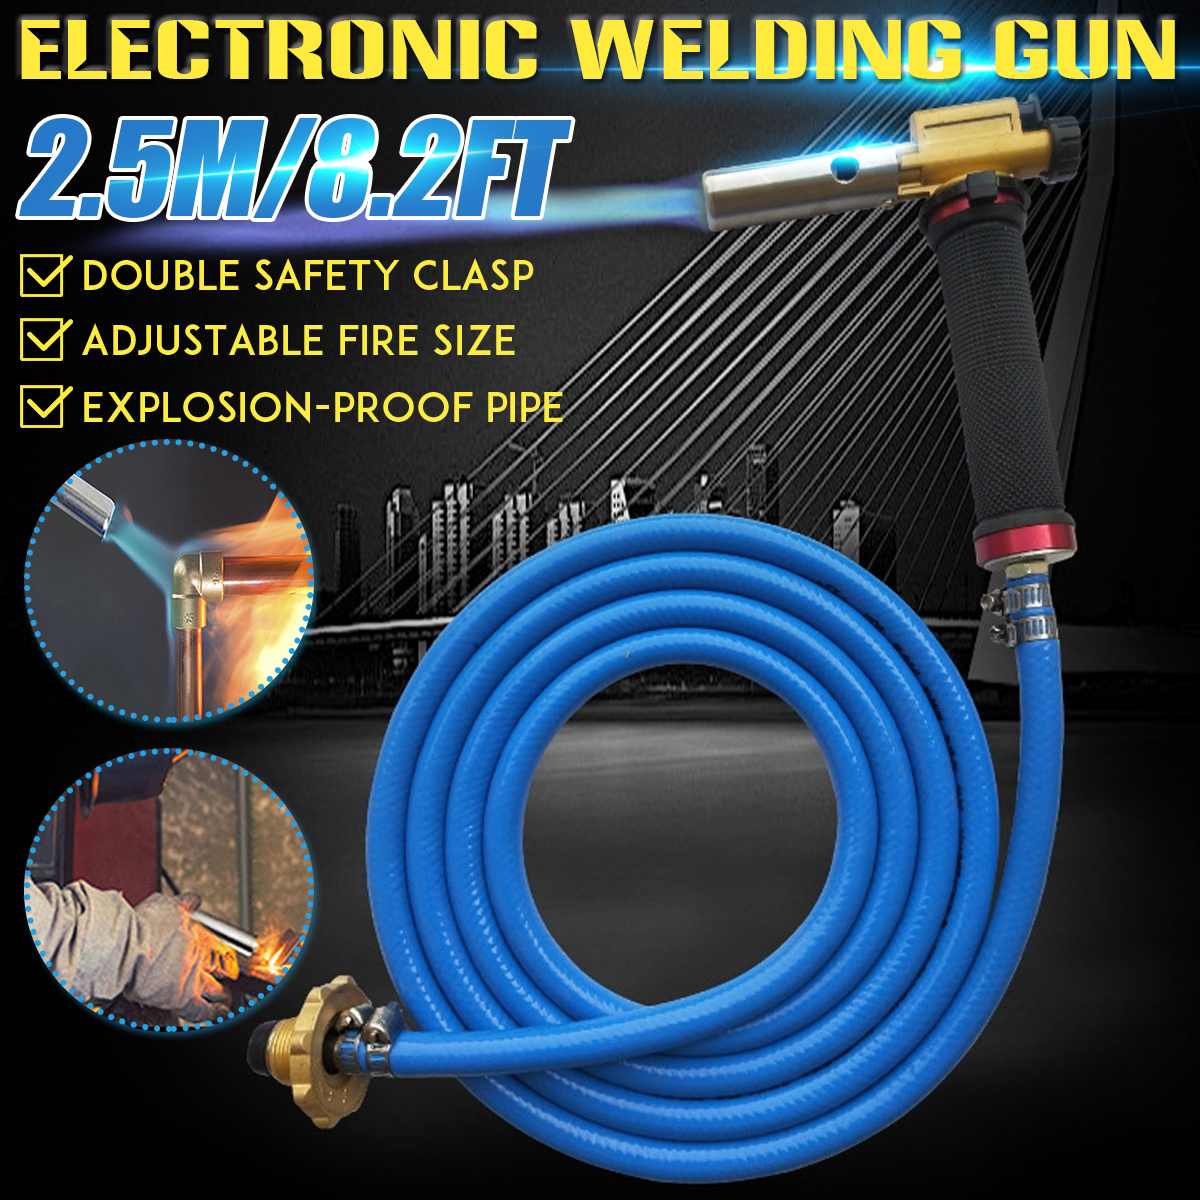 Liquefied Propane Gas Electronic Ignition Welding Gun Torch Machine Equipment with 2.5M Hose for Soldering Weld Cooking Heating